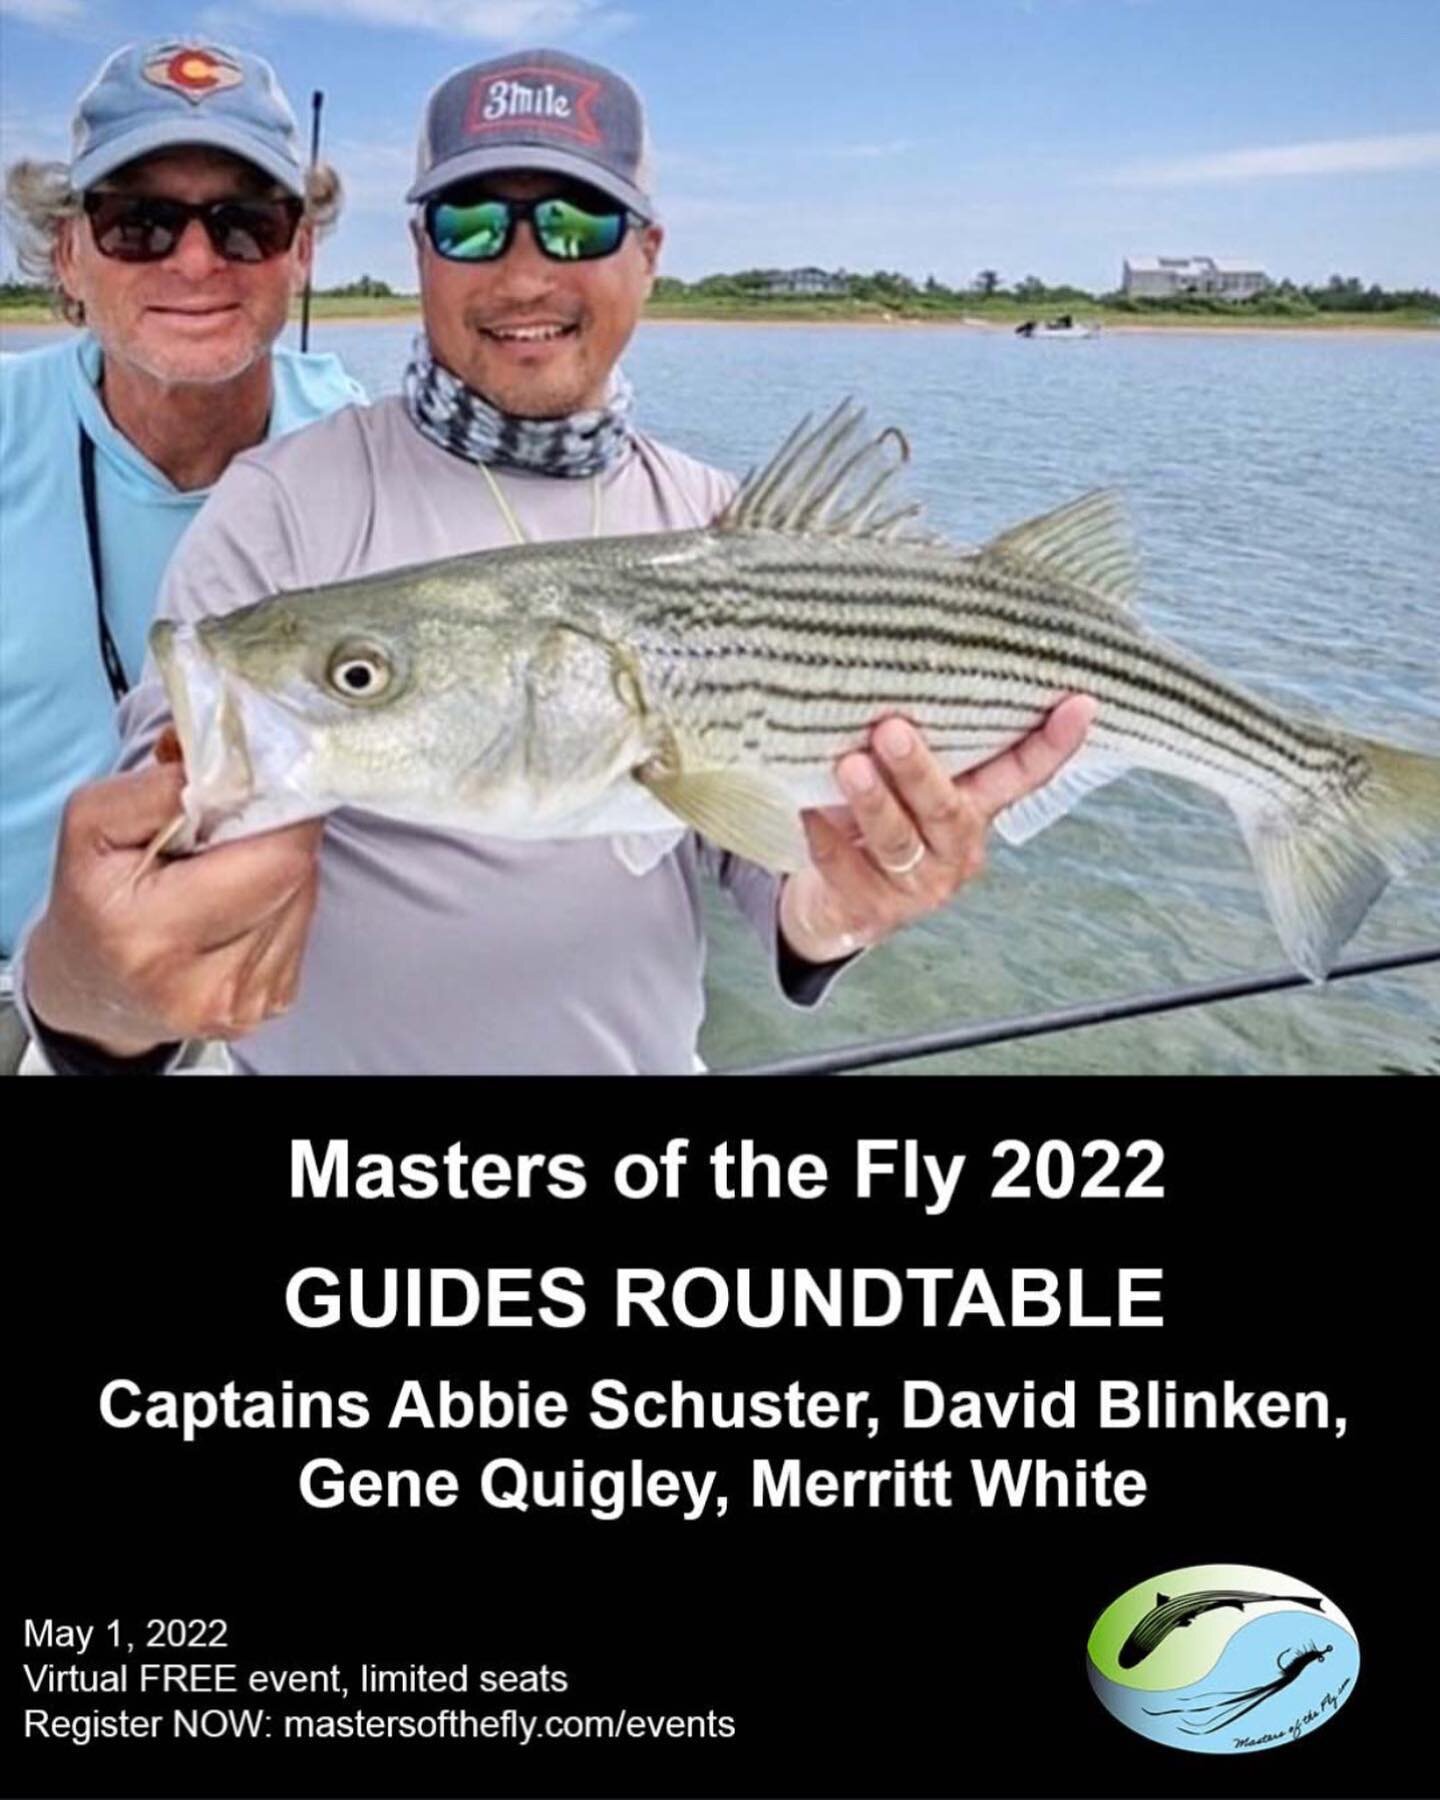 LAST EVENT OF THE SEASON! Join us for tonight&rsquo;s free Zoom for a 2022 fishing season report from four guides covering New Jersey to Massachusetts. Catch &lsquo;em up y&rsquo;all!!
.
#mastersofthefly